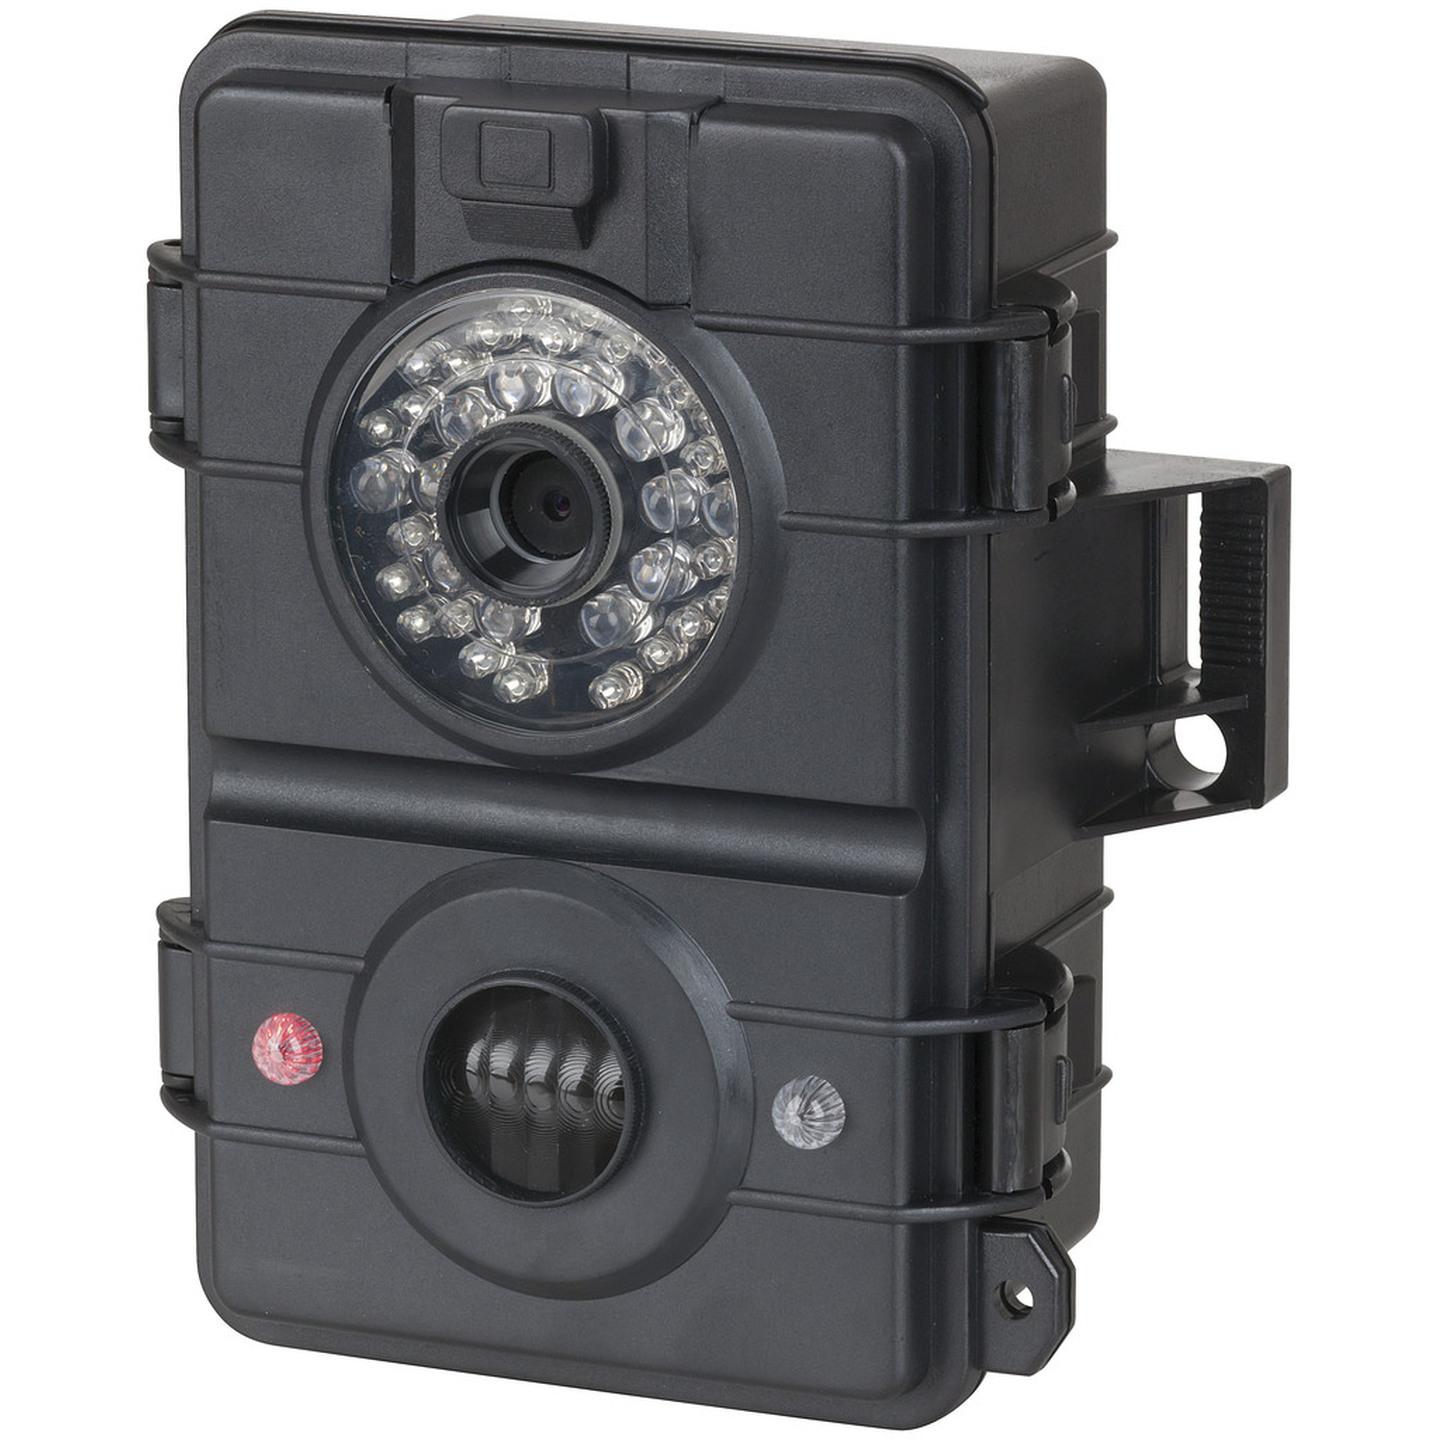 Motion Activated Outdoor Camera 720p with IR Flash